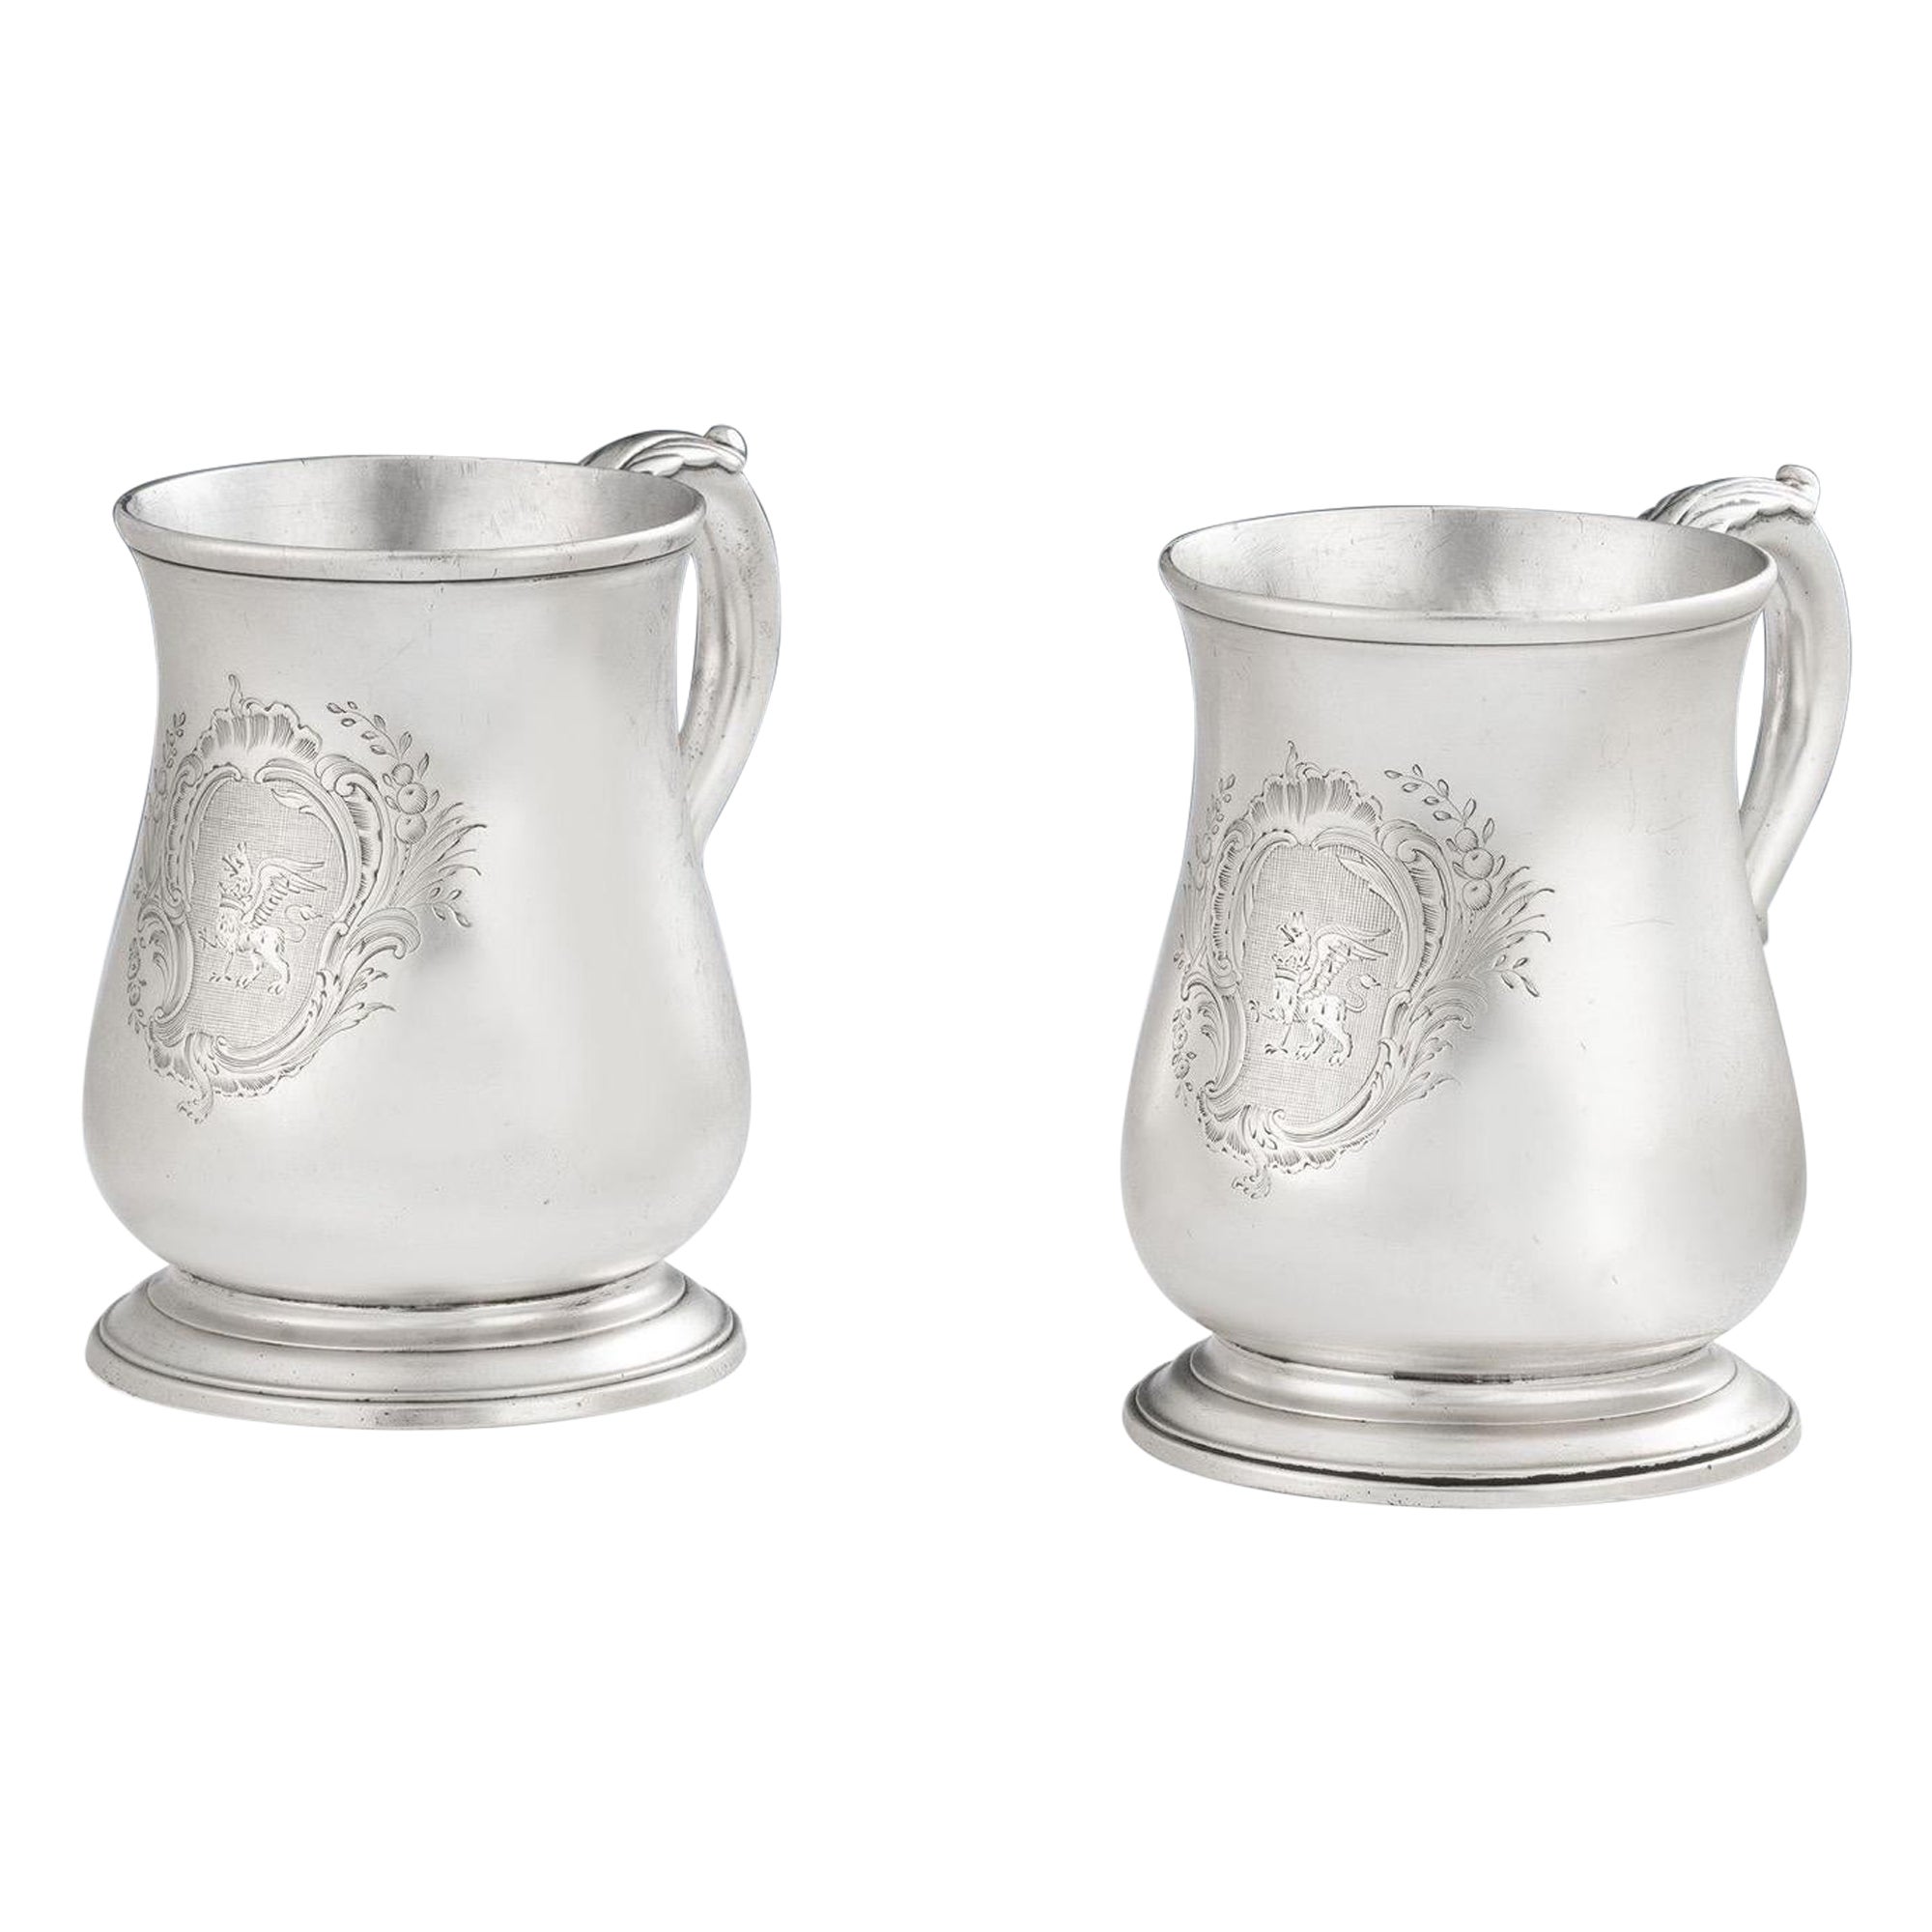 Pair of George II Half Pint Mugs Made in London by Thomas Whipham, 1754